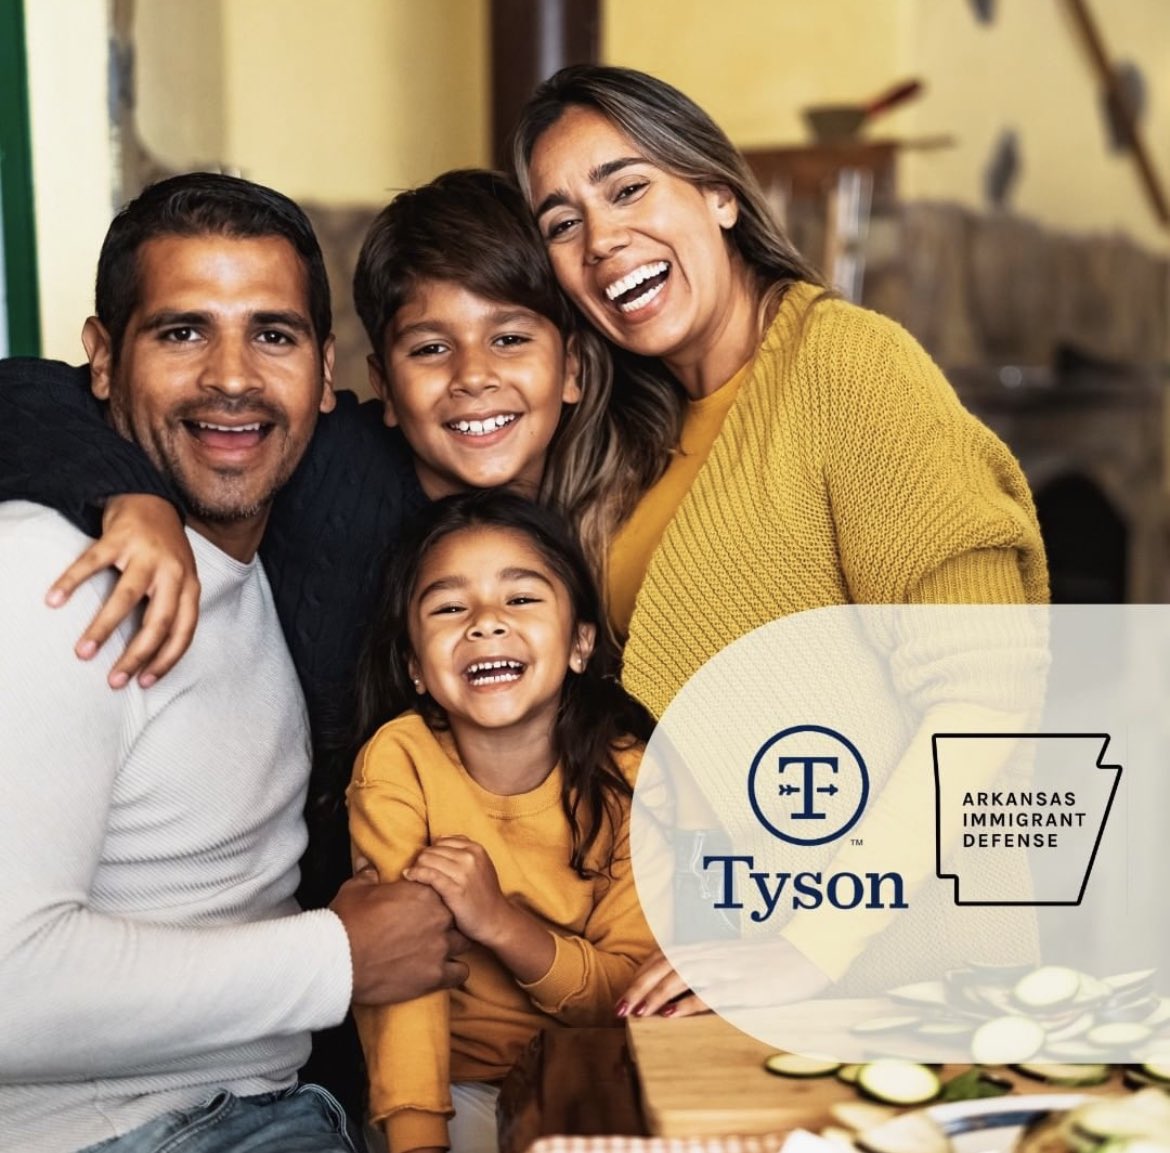 We’re eager to work w/@tysonfoods on the Tyson Immigration Partnership (TIP) initiative! Tyson pledged over $1 million to help refugee & immigrant employees w/legal services, incl. employment authorization renewals, green card renewals, & petitions for citizenship. #tysontogether